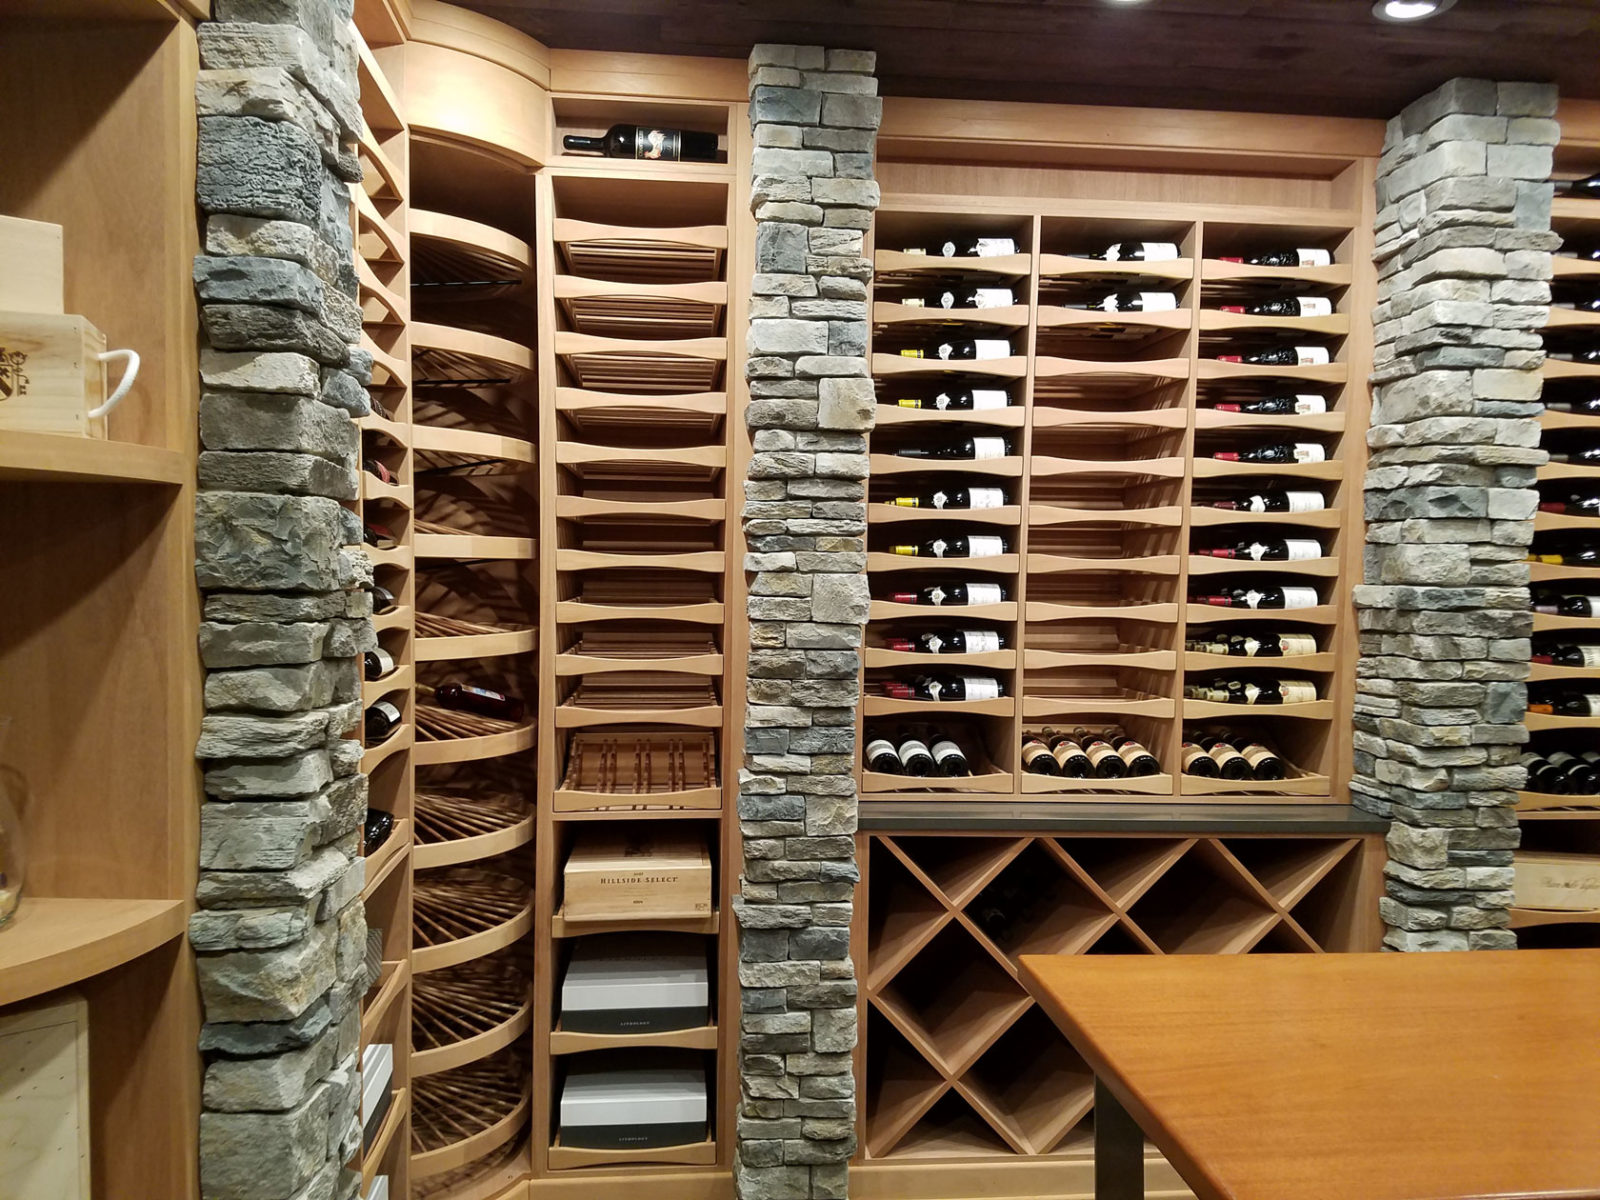 Sliding Pullout Wine Drawers and Rotating Wine Storage